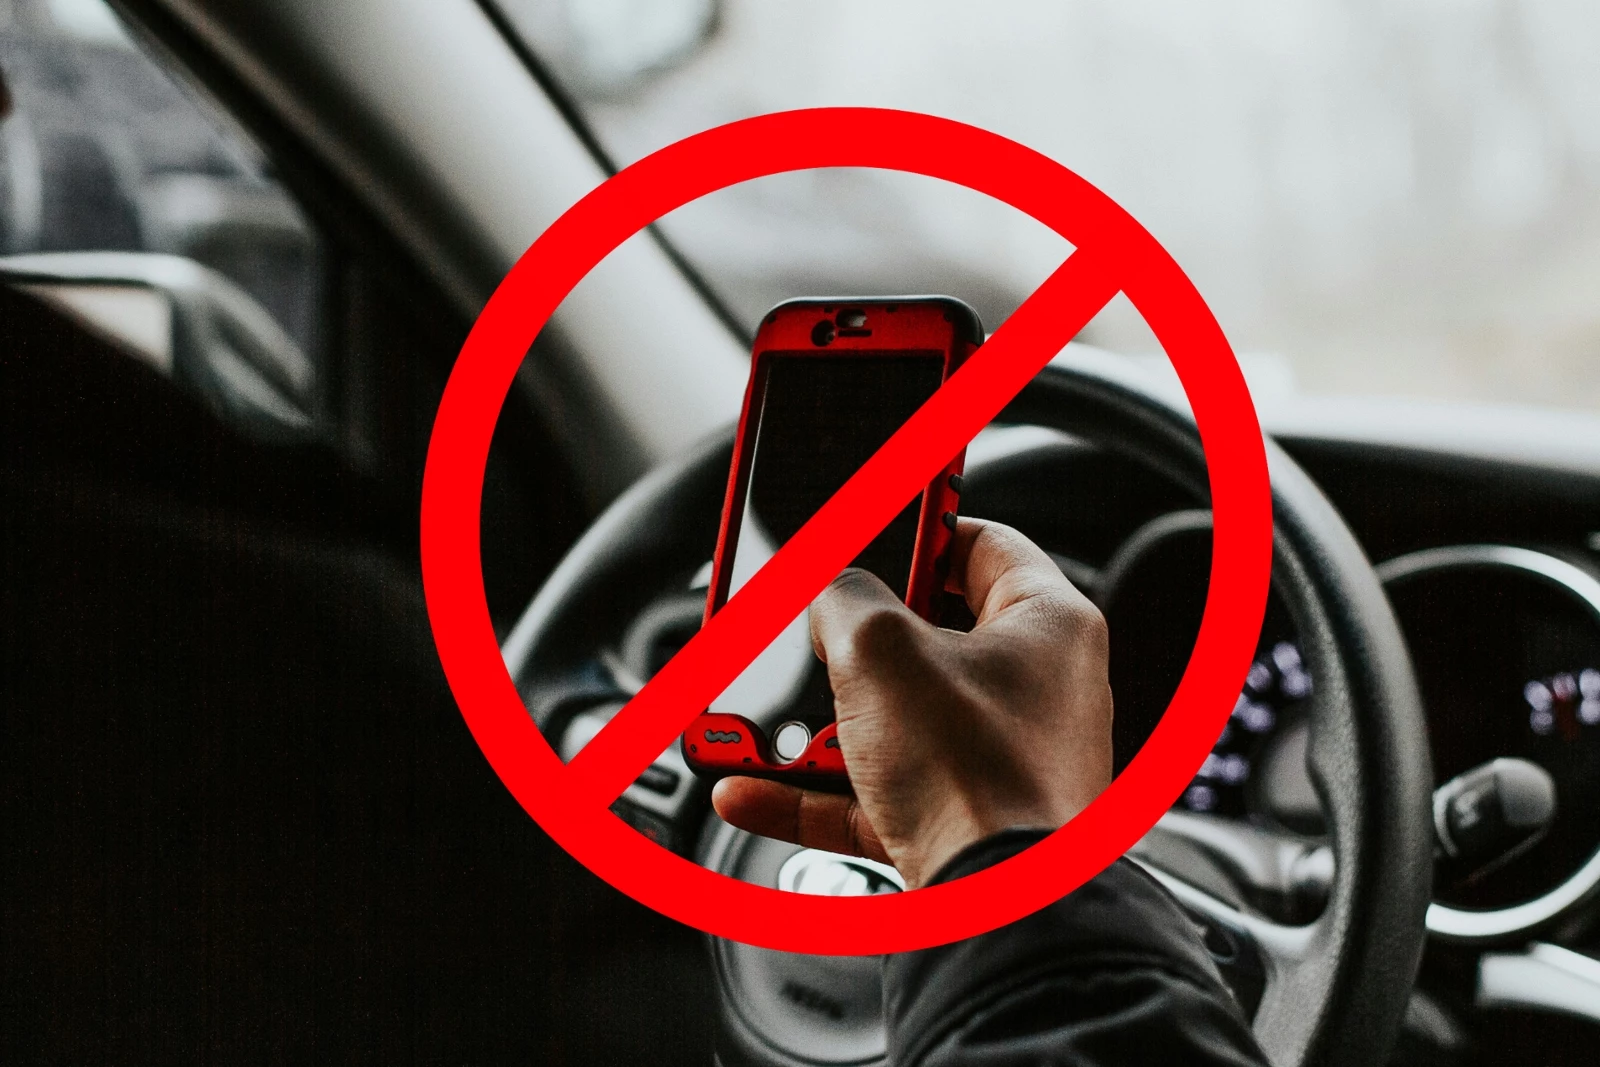 Should Cellphone Use While Driving Be Banned In Louisiana?